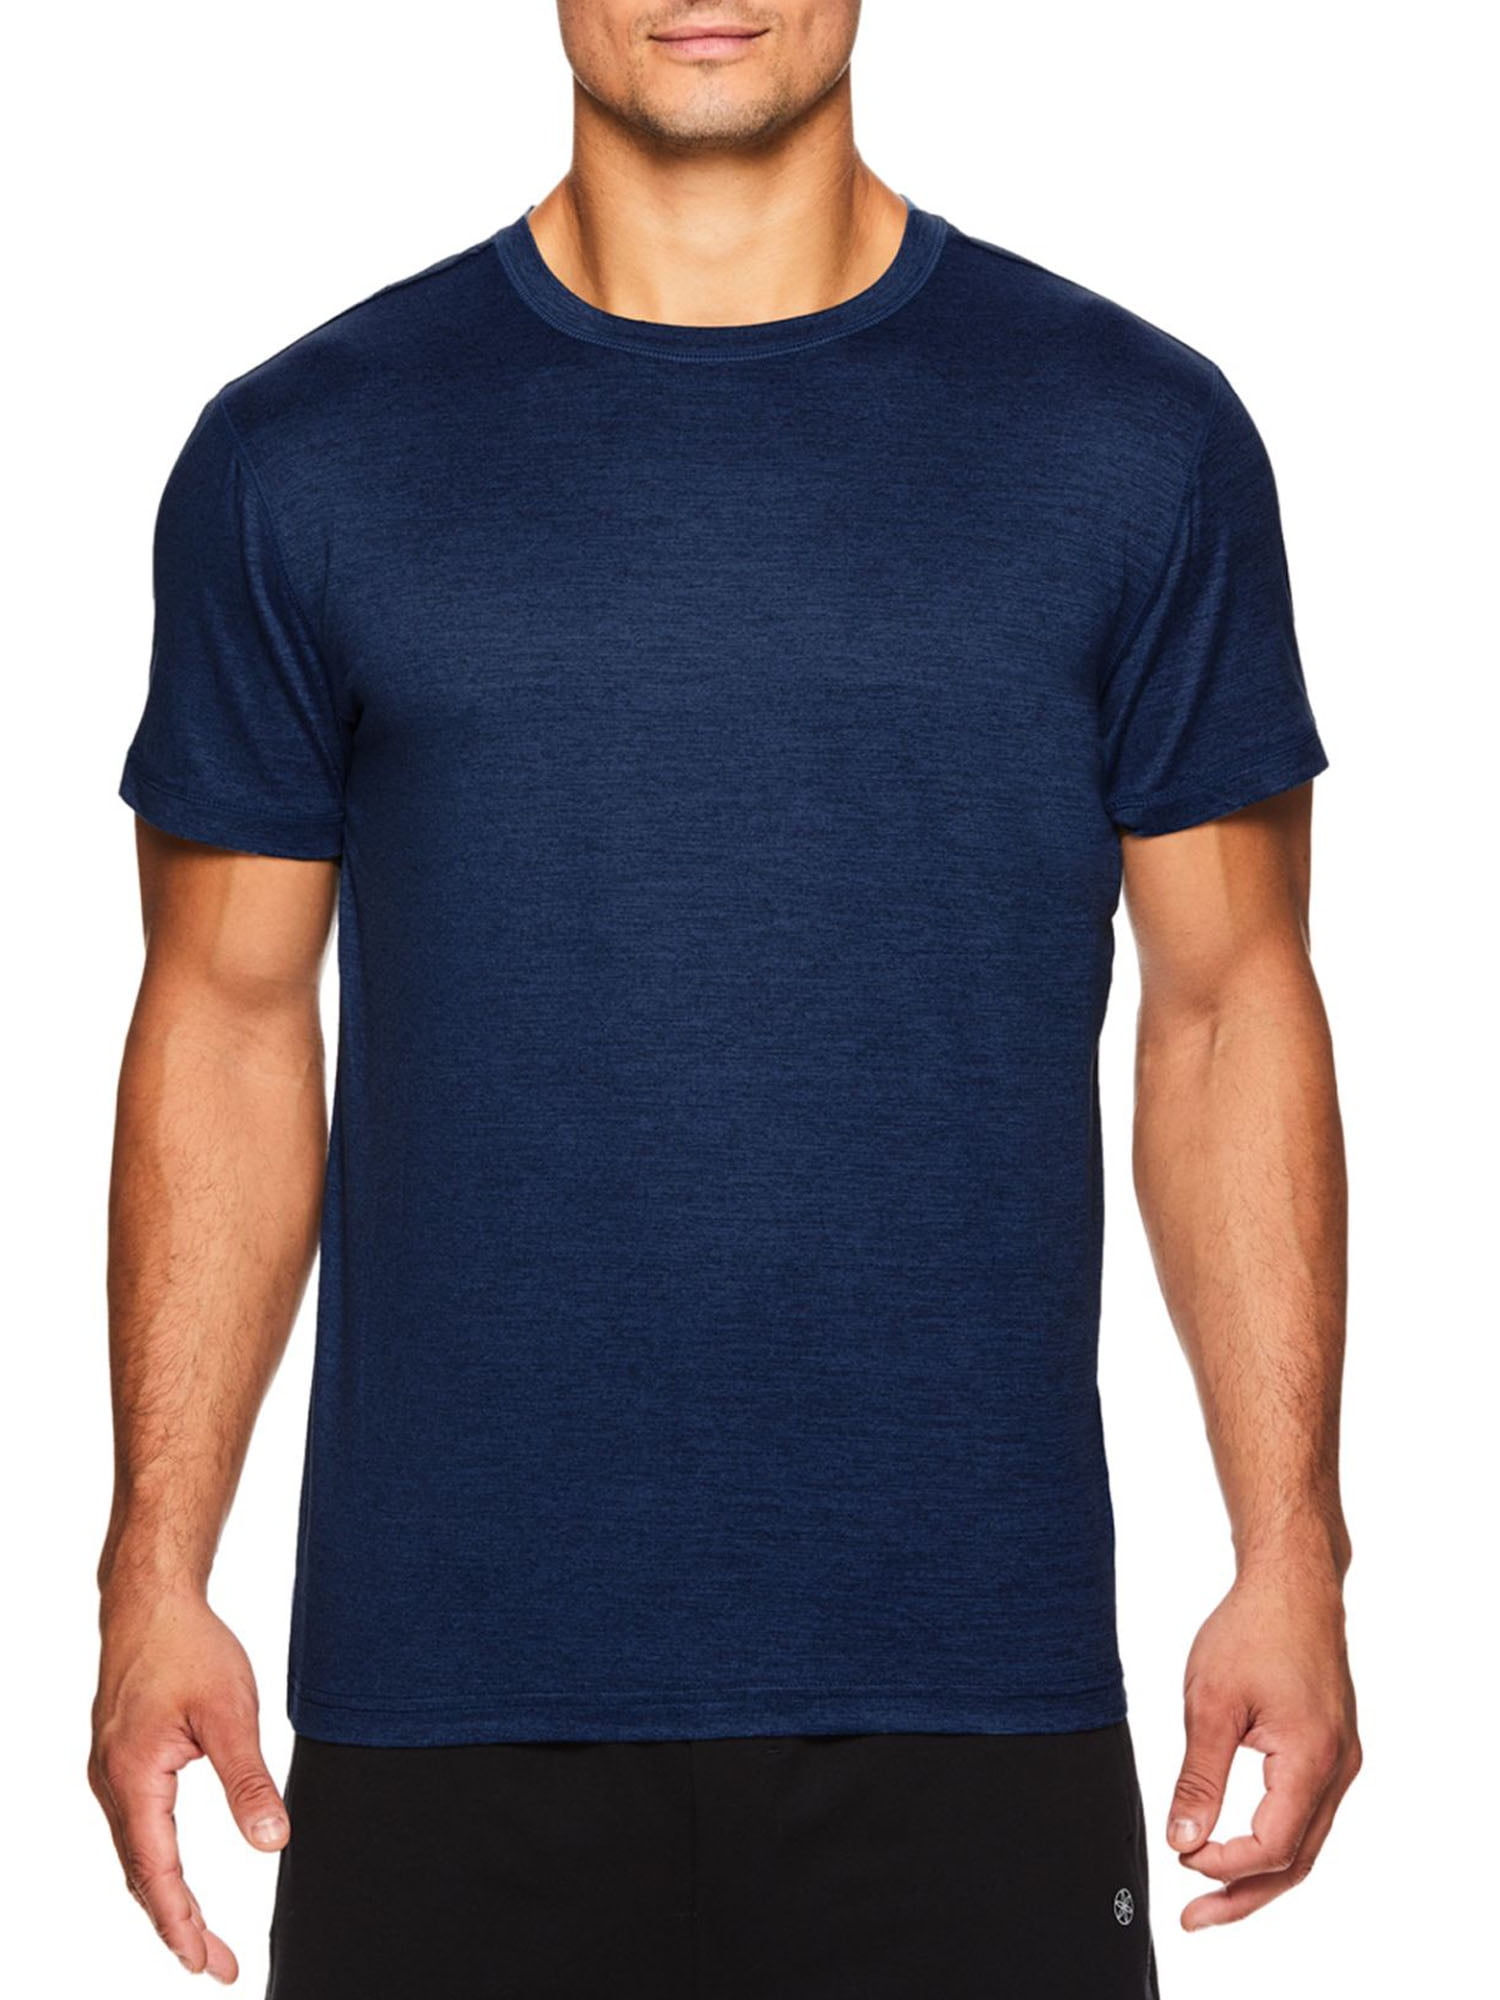 Gaiam Men's Long Sleeve Relaxed Fit T Shirt - Yoga & Workout